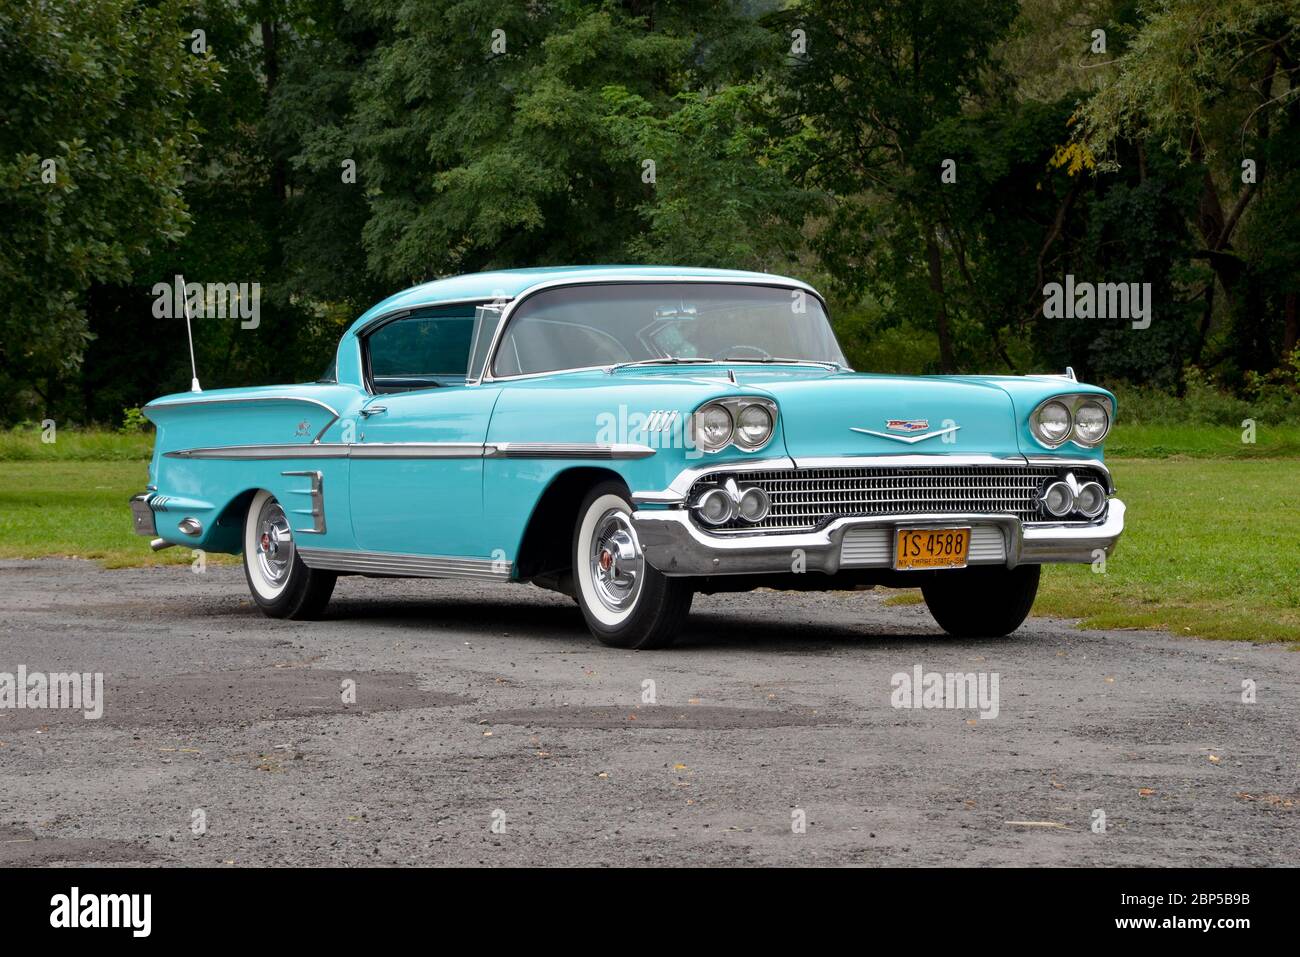 turquoise 1958 Chevrolet Impala coupe three-quarter front view against trees Stock Photo